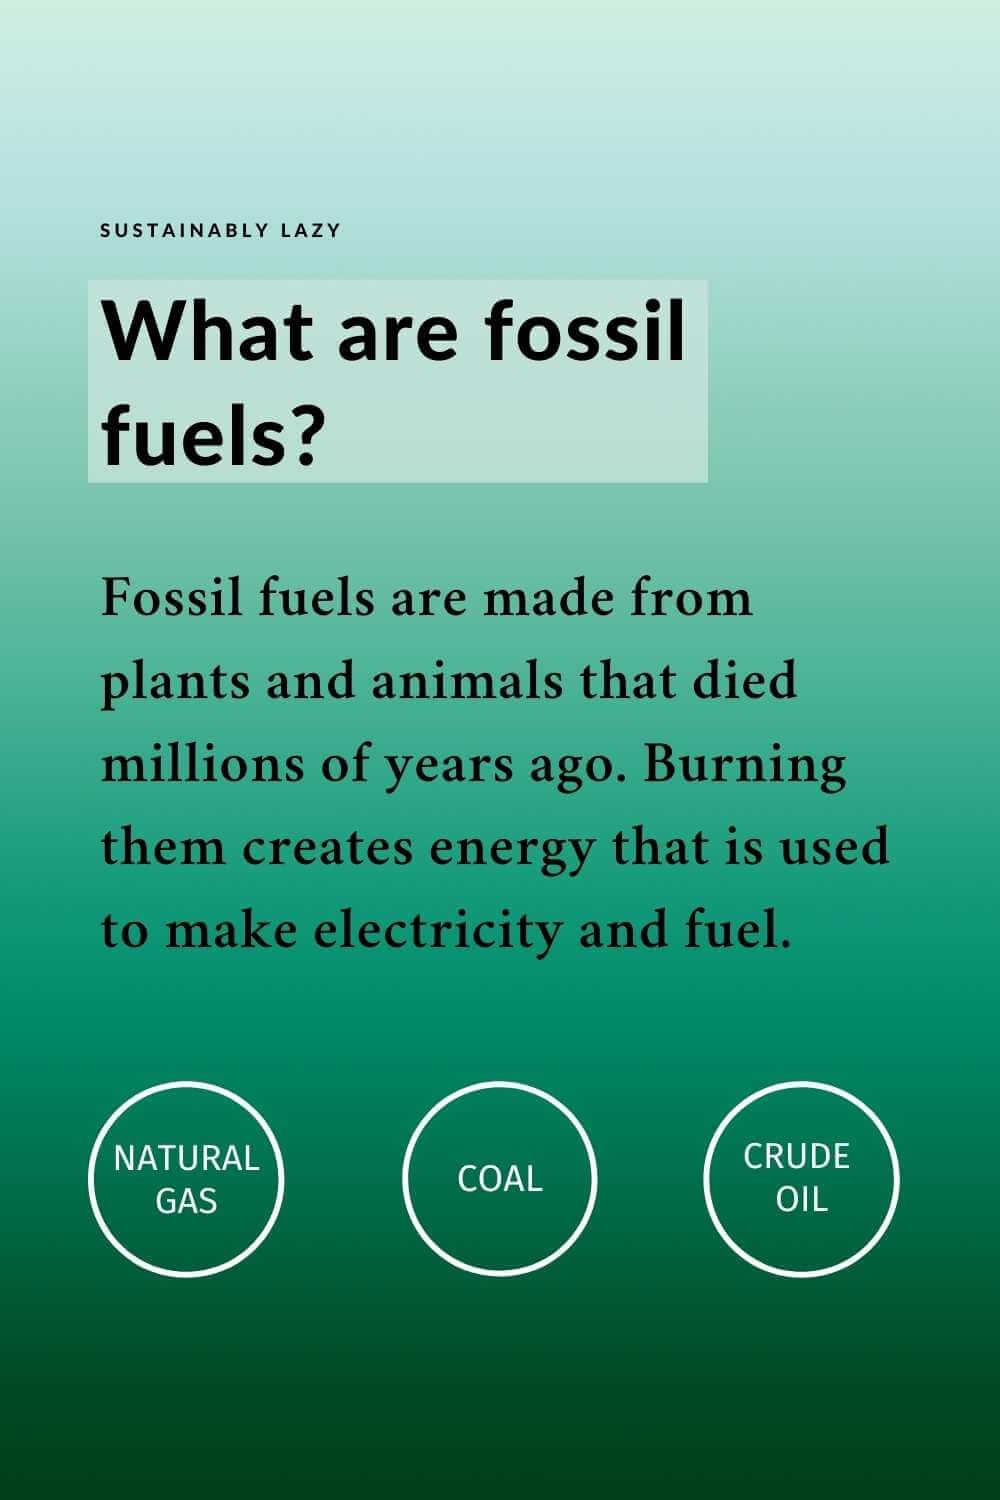 Why Are Fossil Fuels Bad? 10 Filthy Facts About Their Impact — Sustainably  Lazy